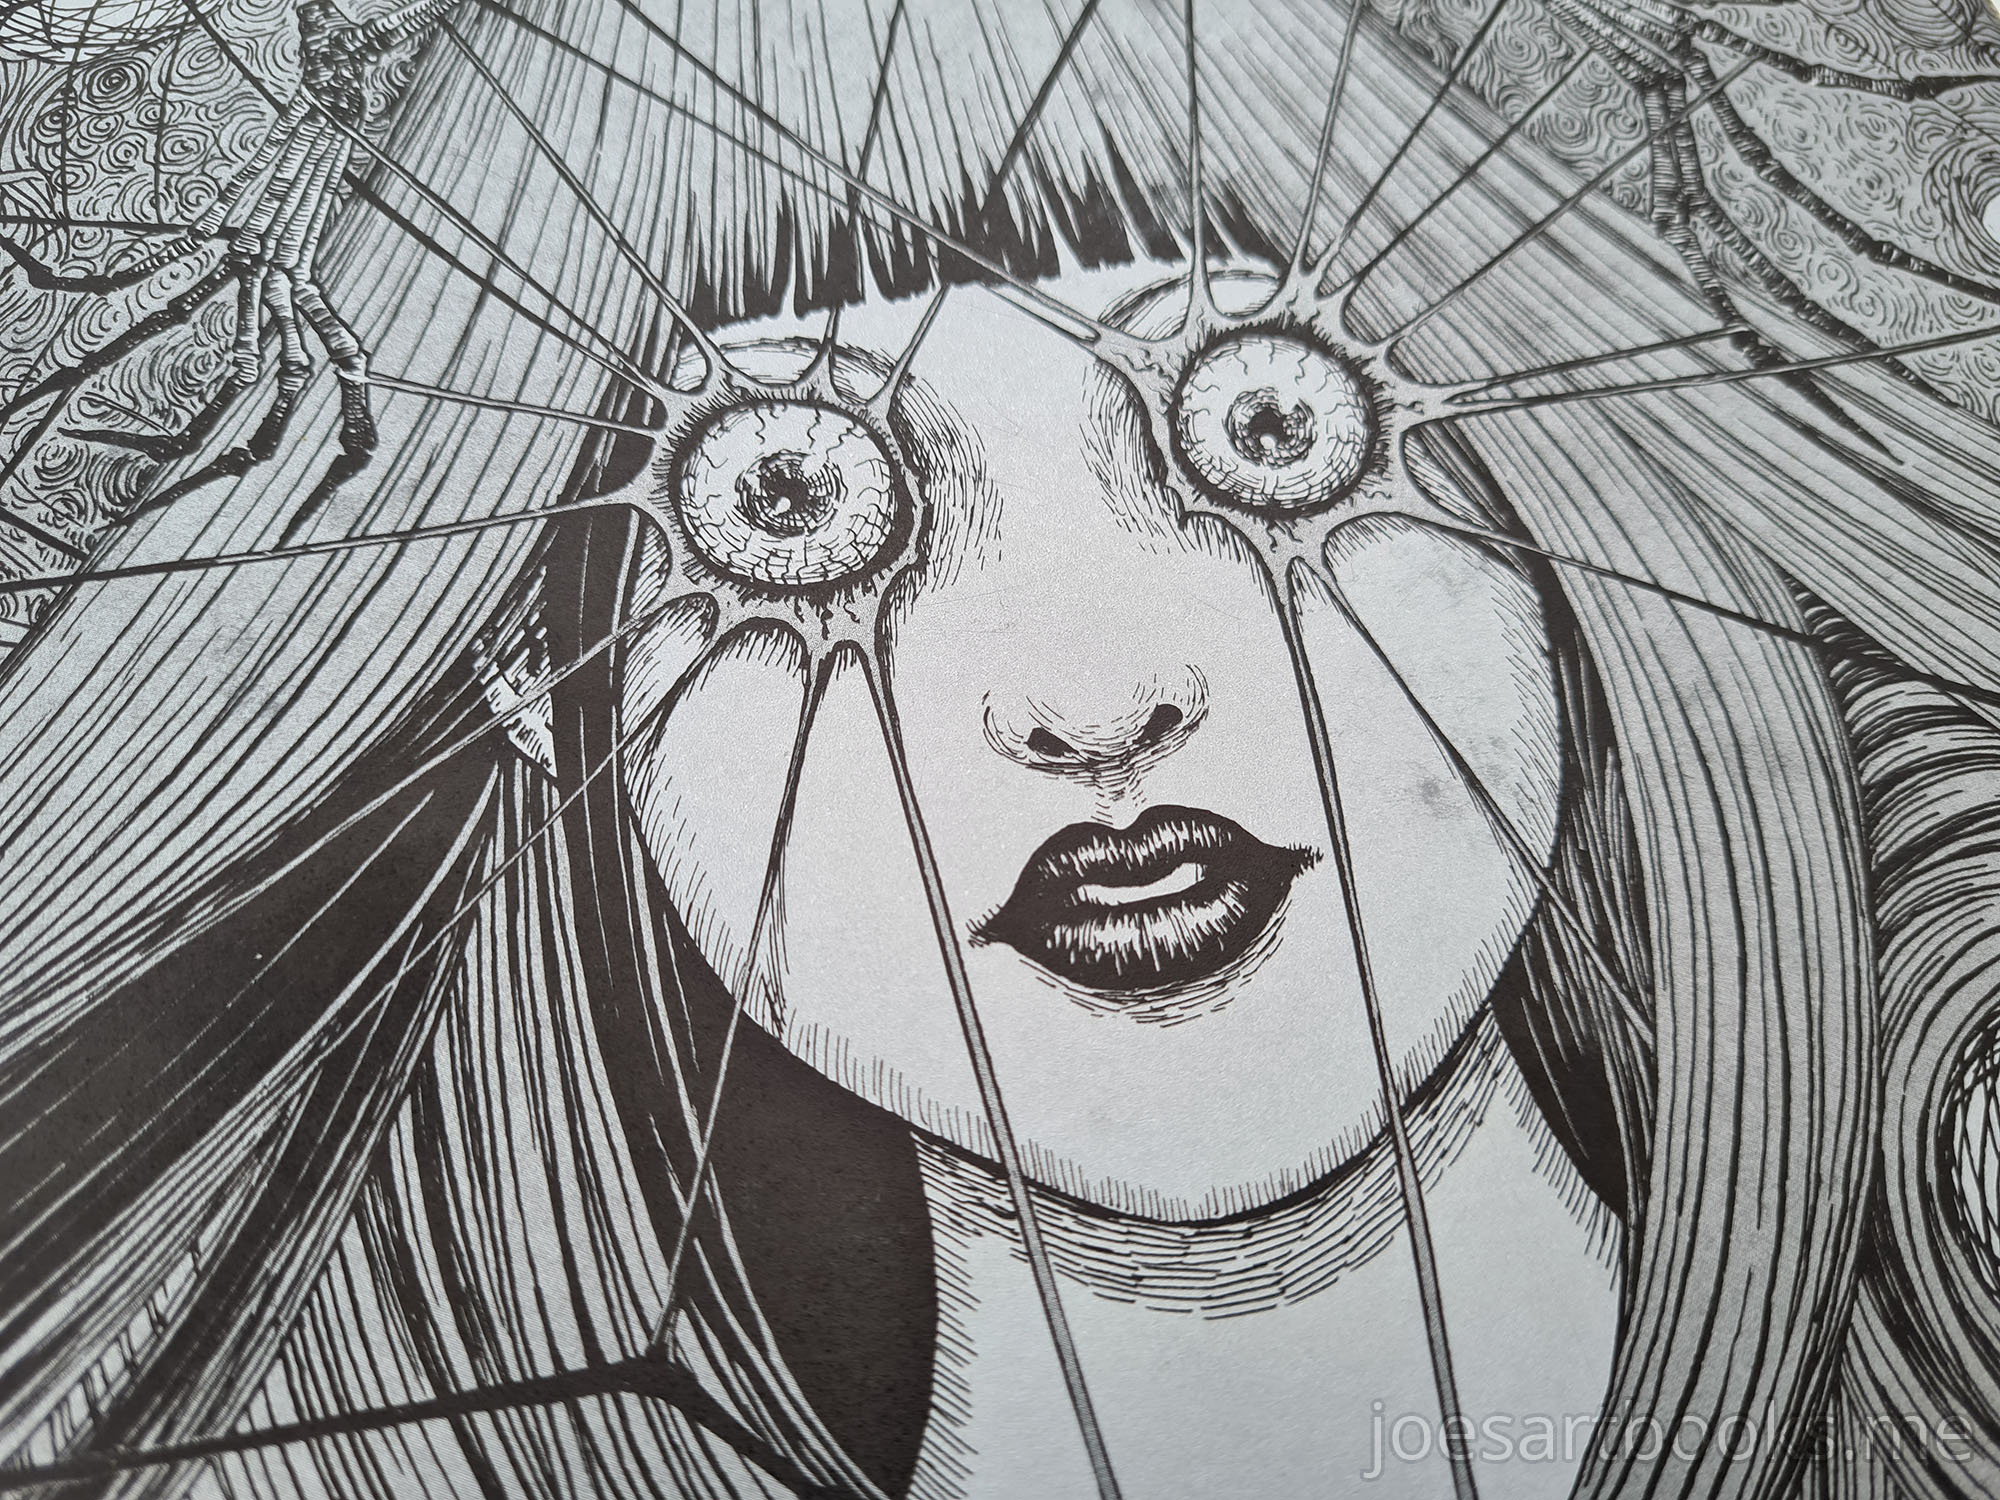 The Art Of Junji Ito Twisted Visions Art Book Review Joes Art Books